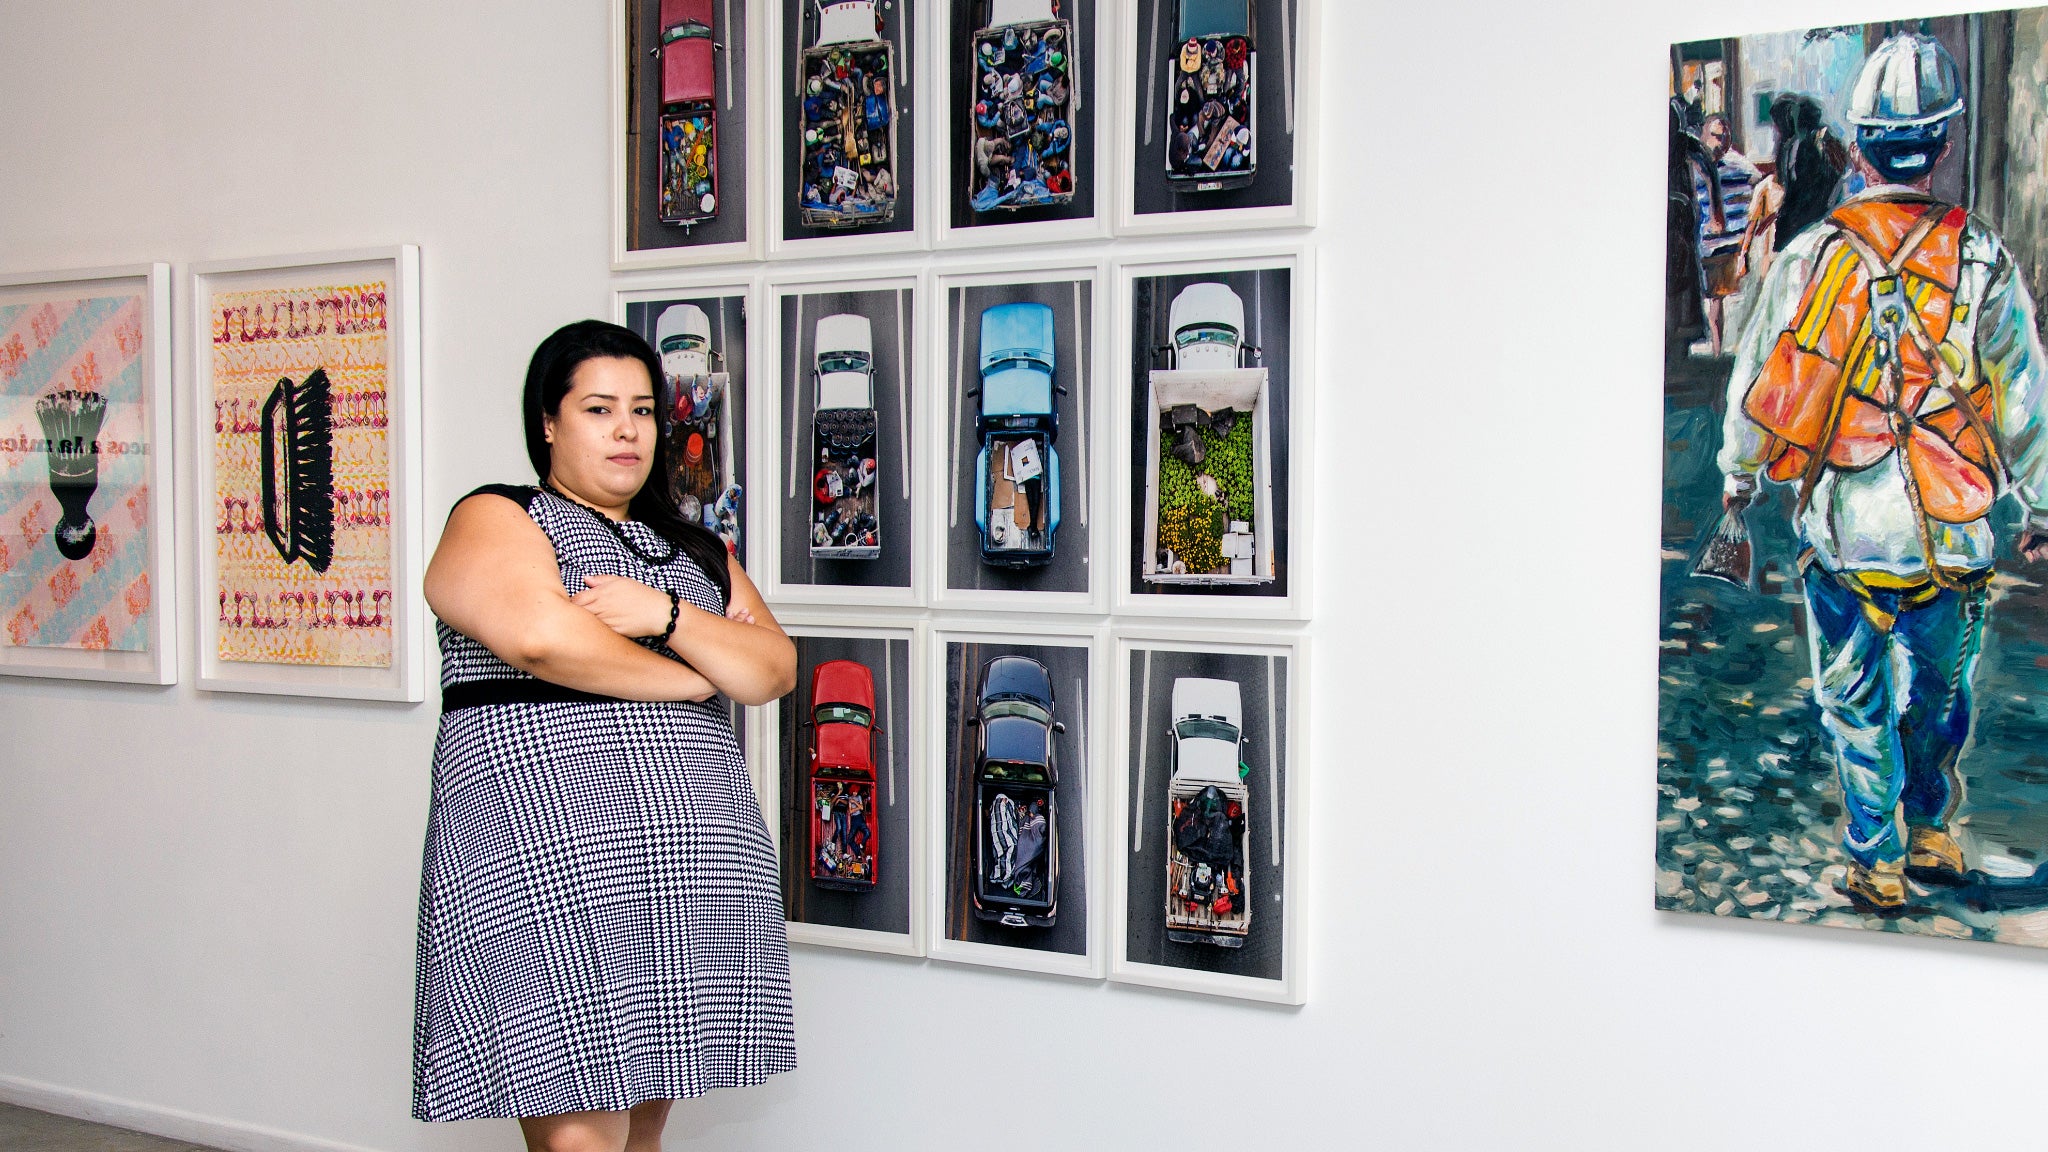 Erika Hirugami poses in front of photos that are part of the art show she curated.